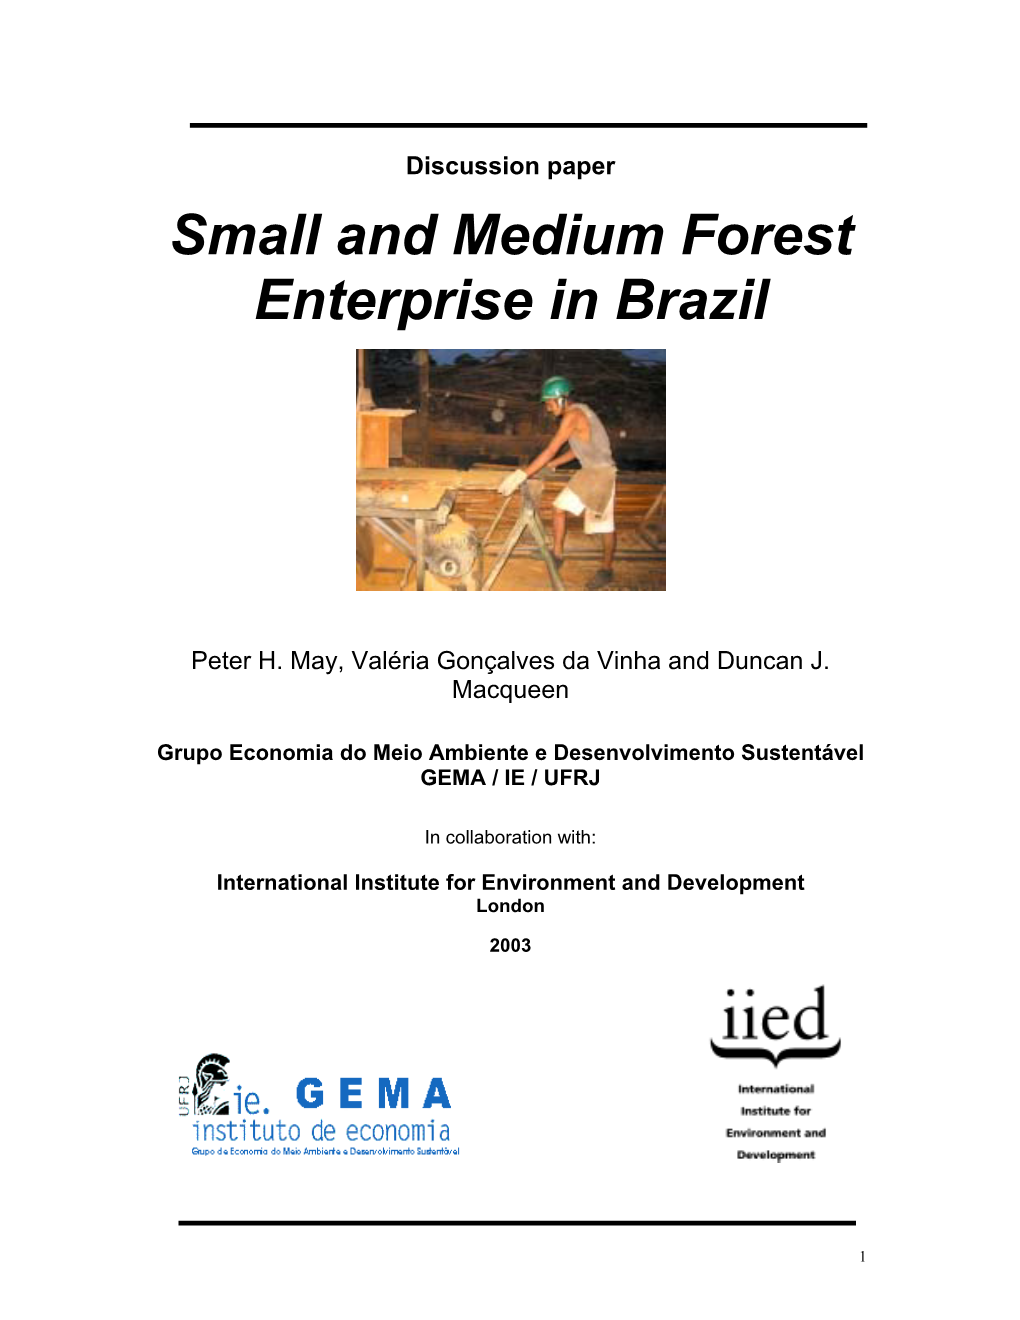 Small and Medium Forest Enterprise in Brazil